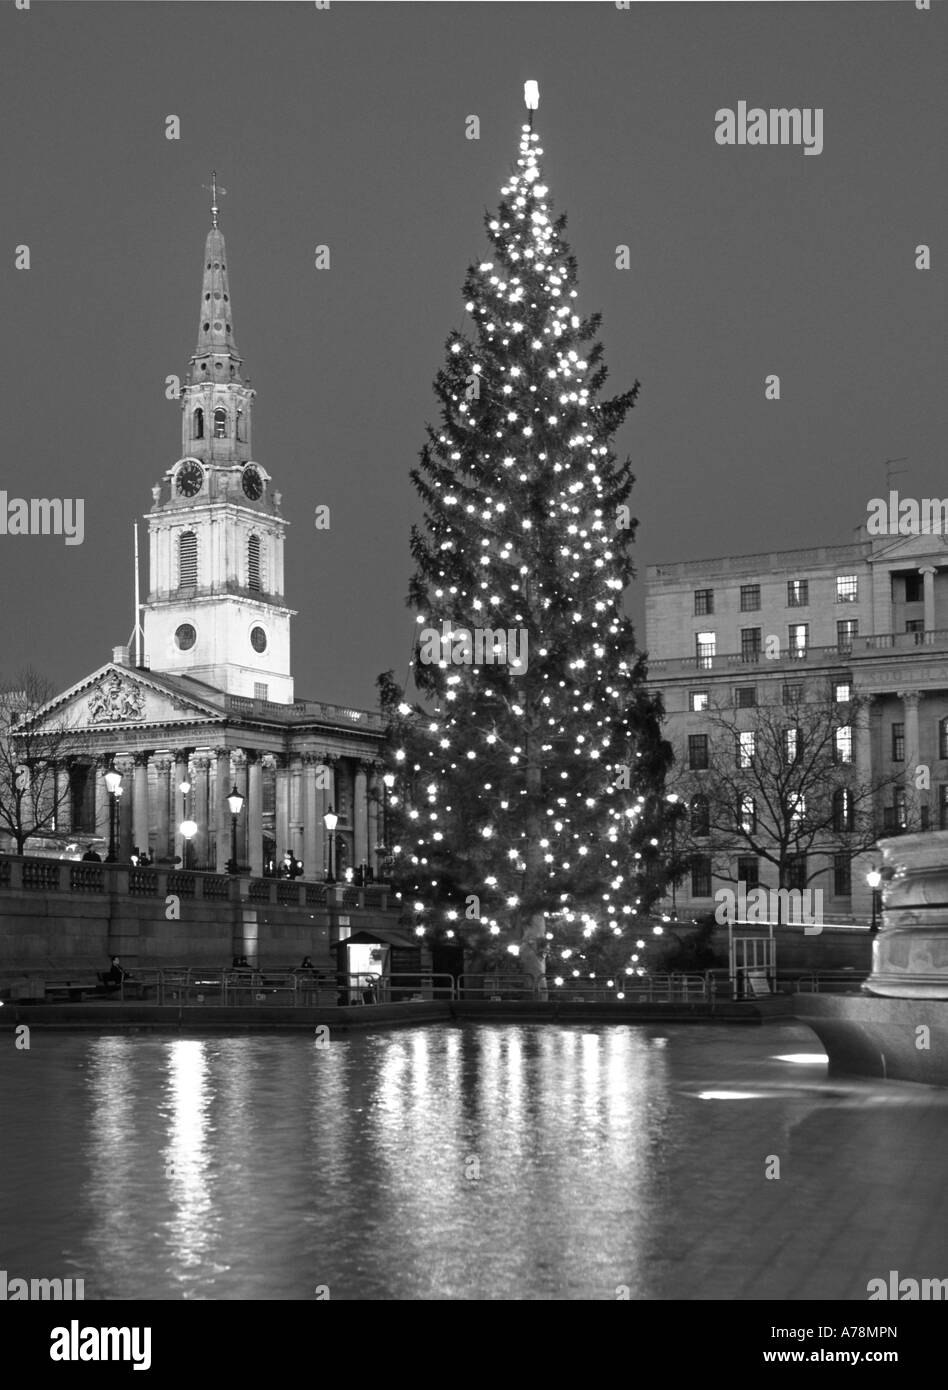 Reflections in water feature Trafalgar Square London England UK & Christmas tree lights with floodlights on St Martin in the Fields church & spire Stock Photo